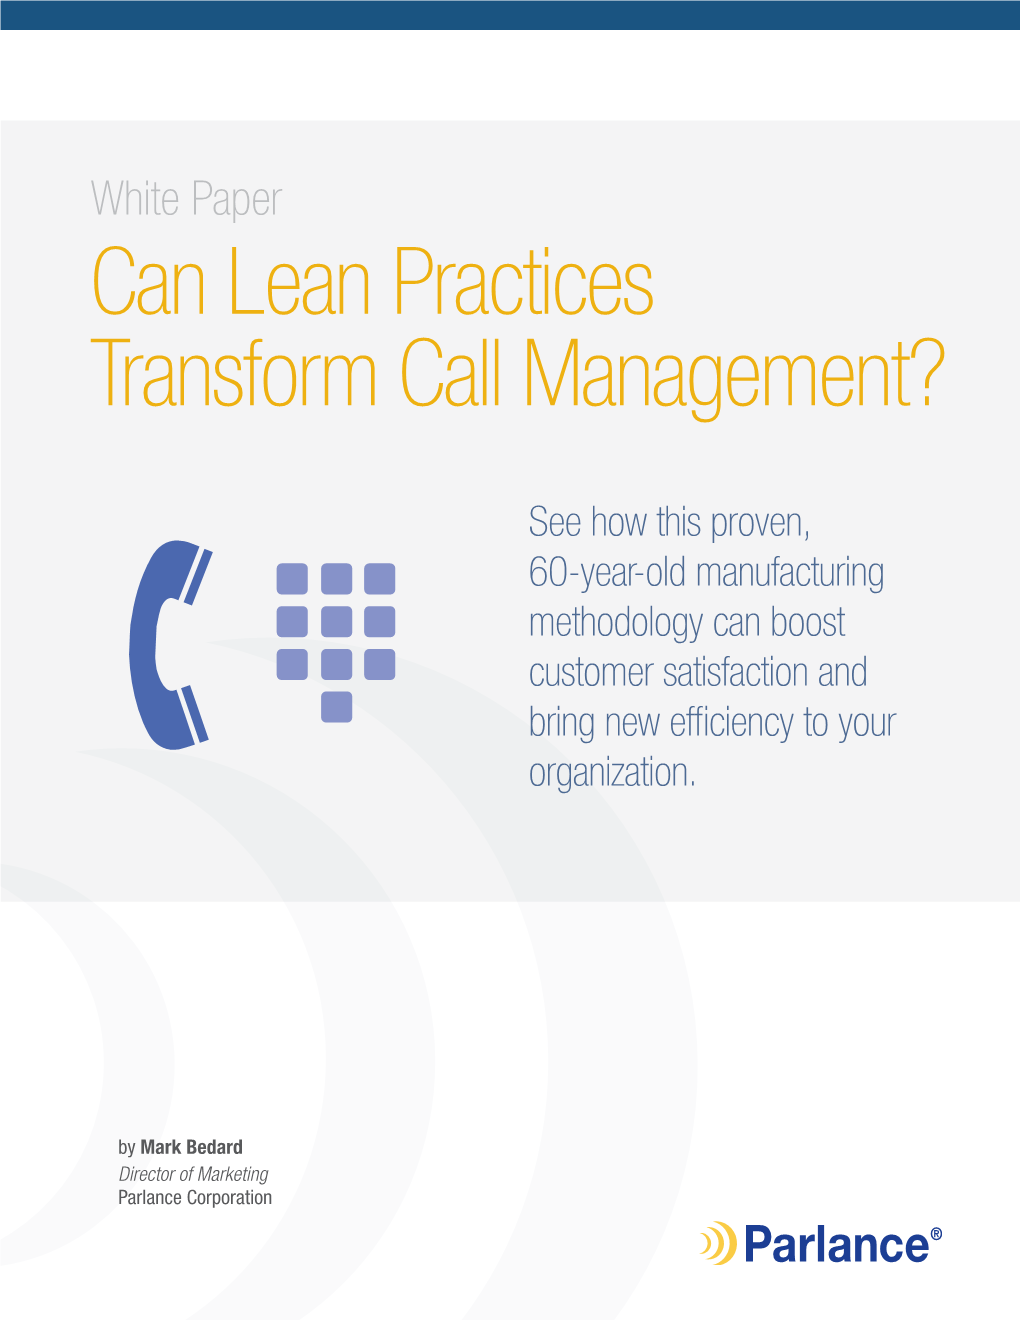 Can Lean Practices Transform Call Management?